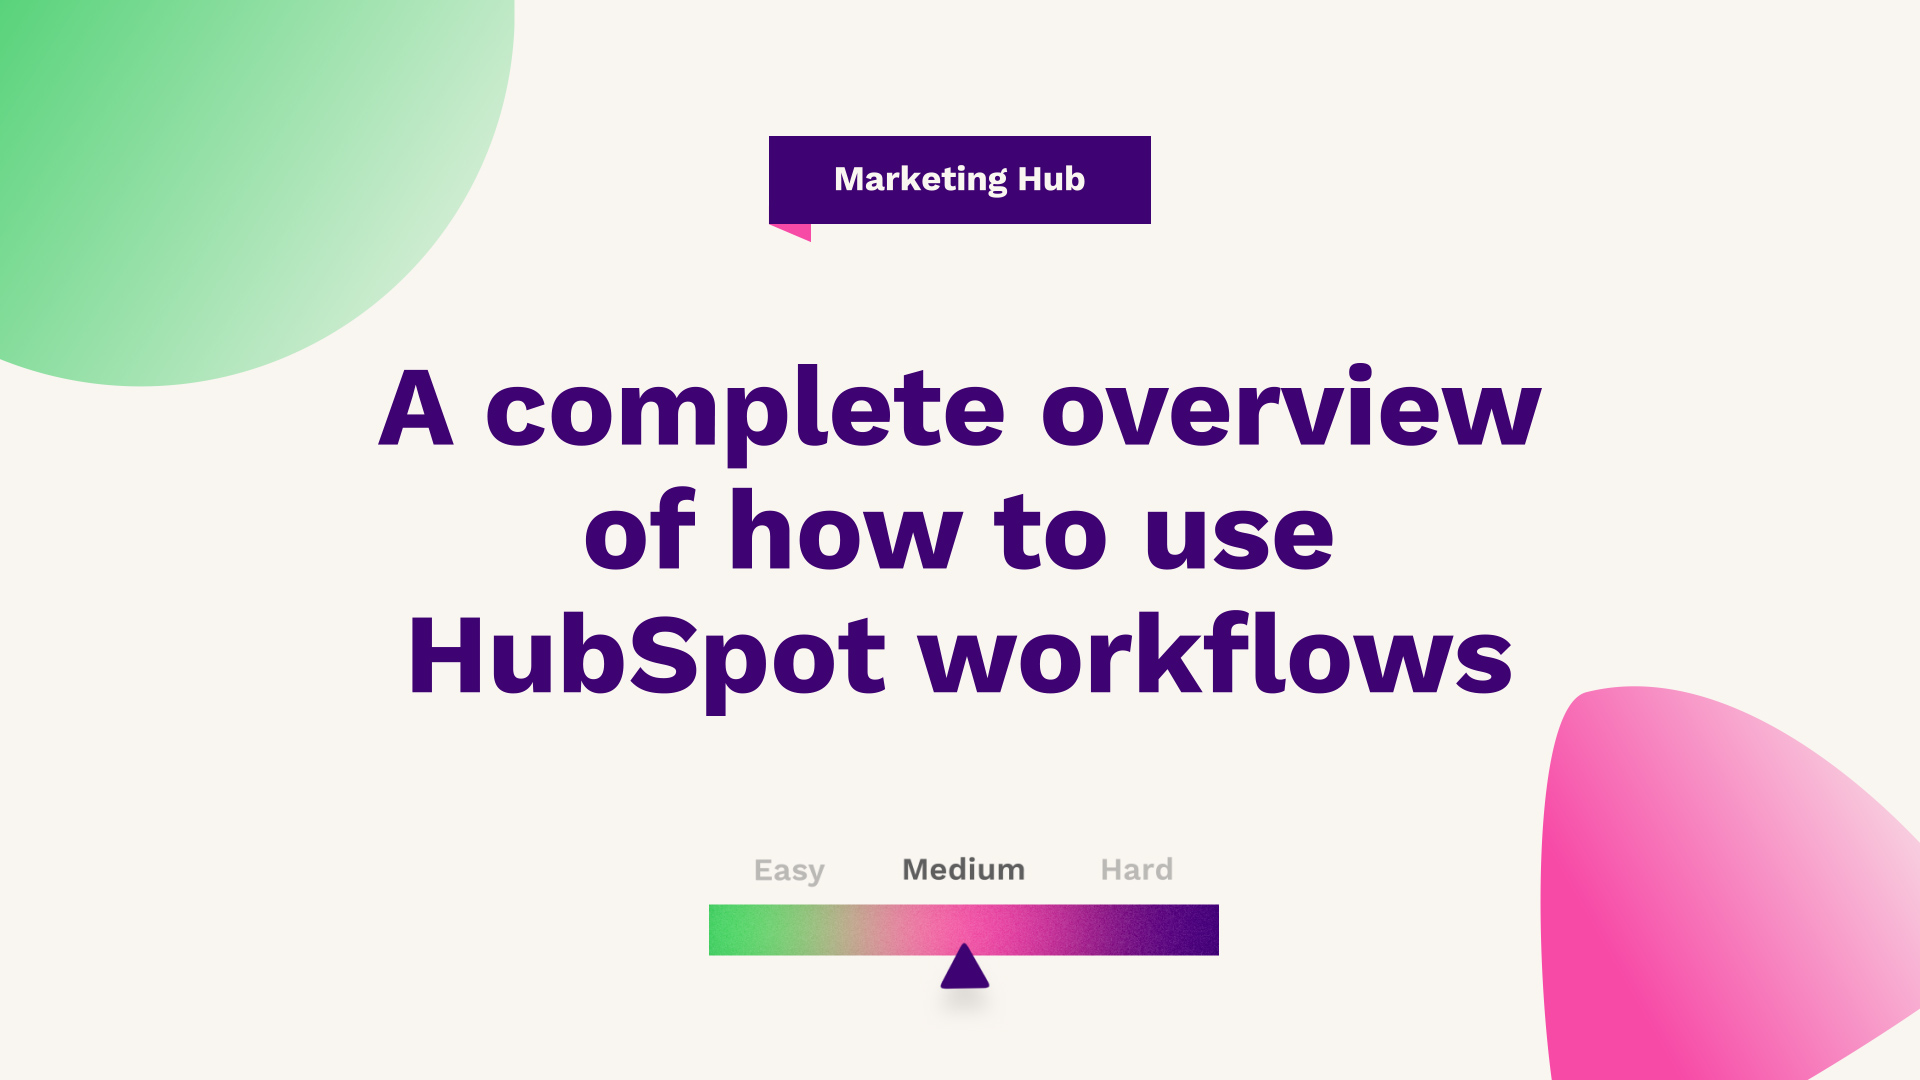 A complete overview of how to use Hubspot workflows